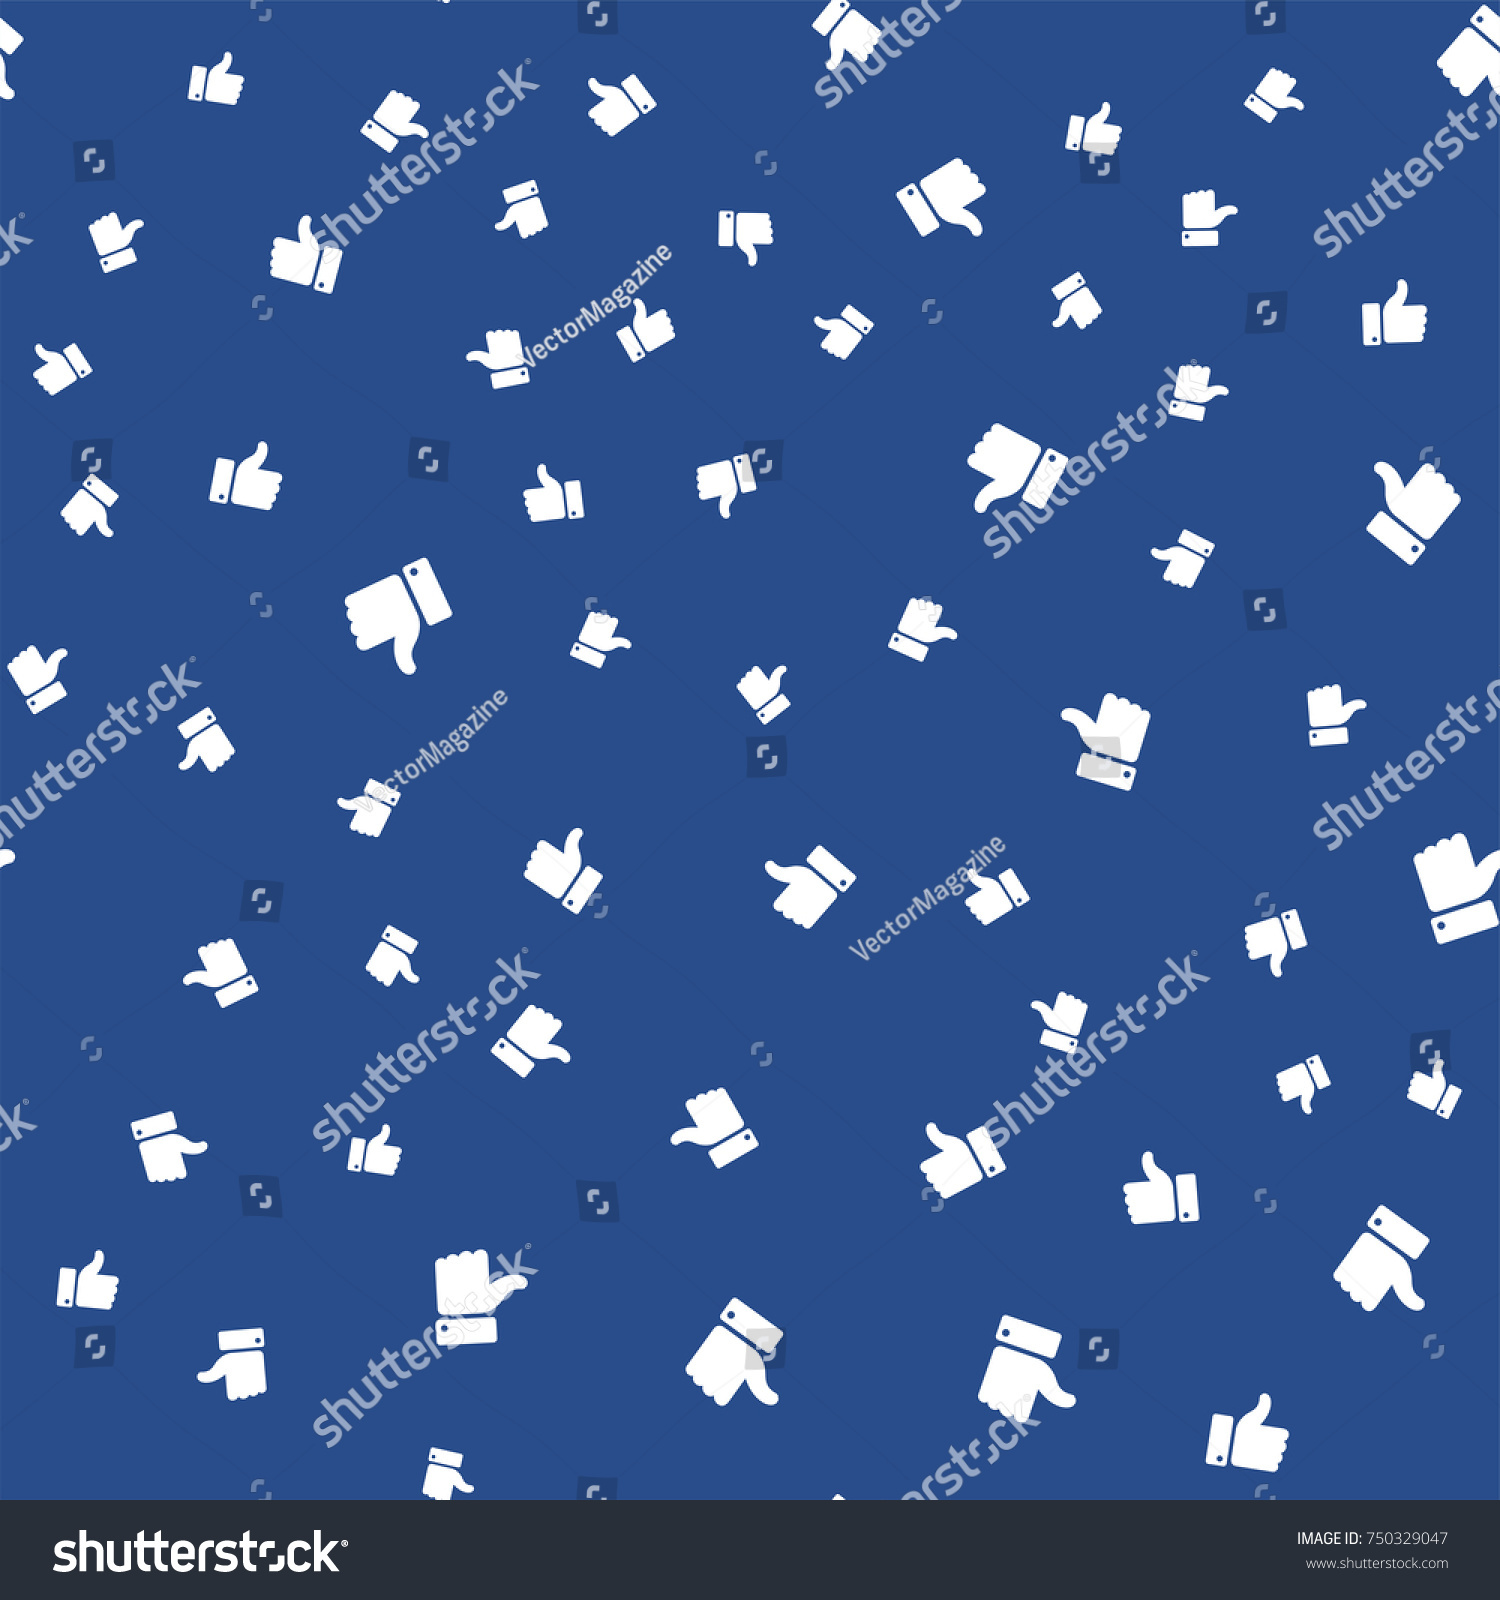 Thumb Seamless Background Facebook Like Abstract Stock Vector